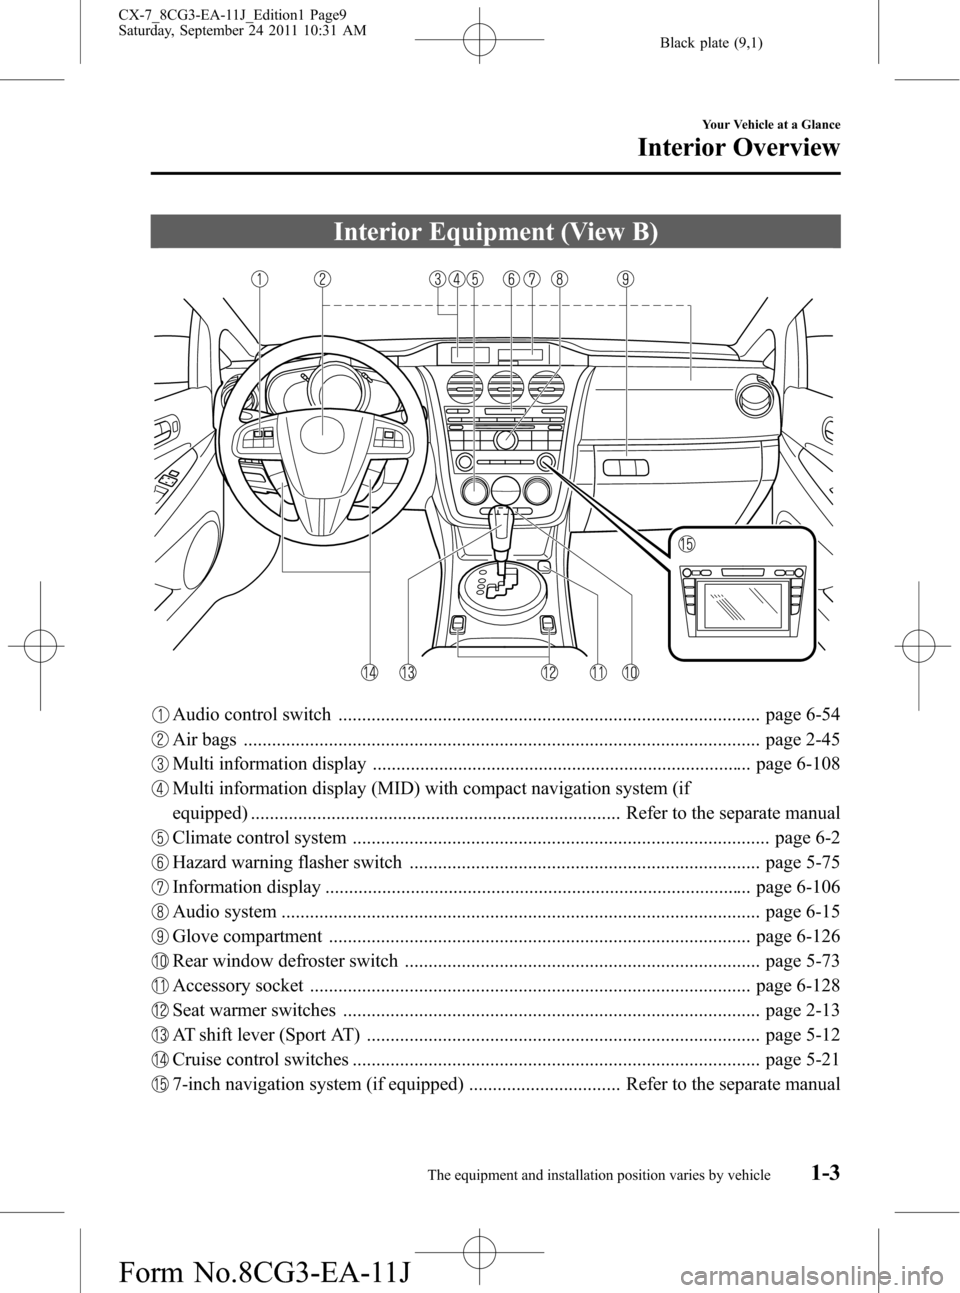 MAZDA MODEL CX-7 2012  Owners Manual (in English) Black plate (9,1)
Interior Equipment (View B)
Audio control switch ......................................................................................... page 6-54
Air bags ........................